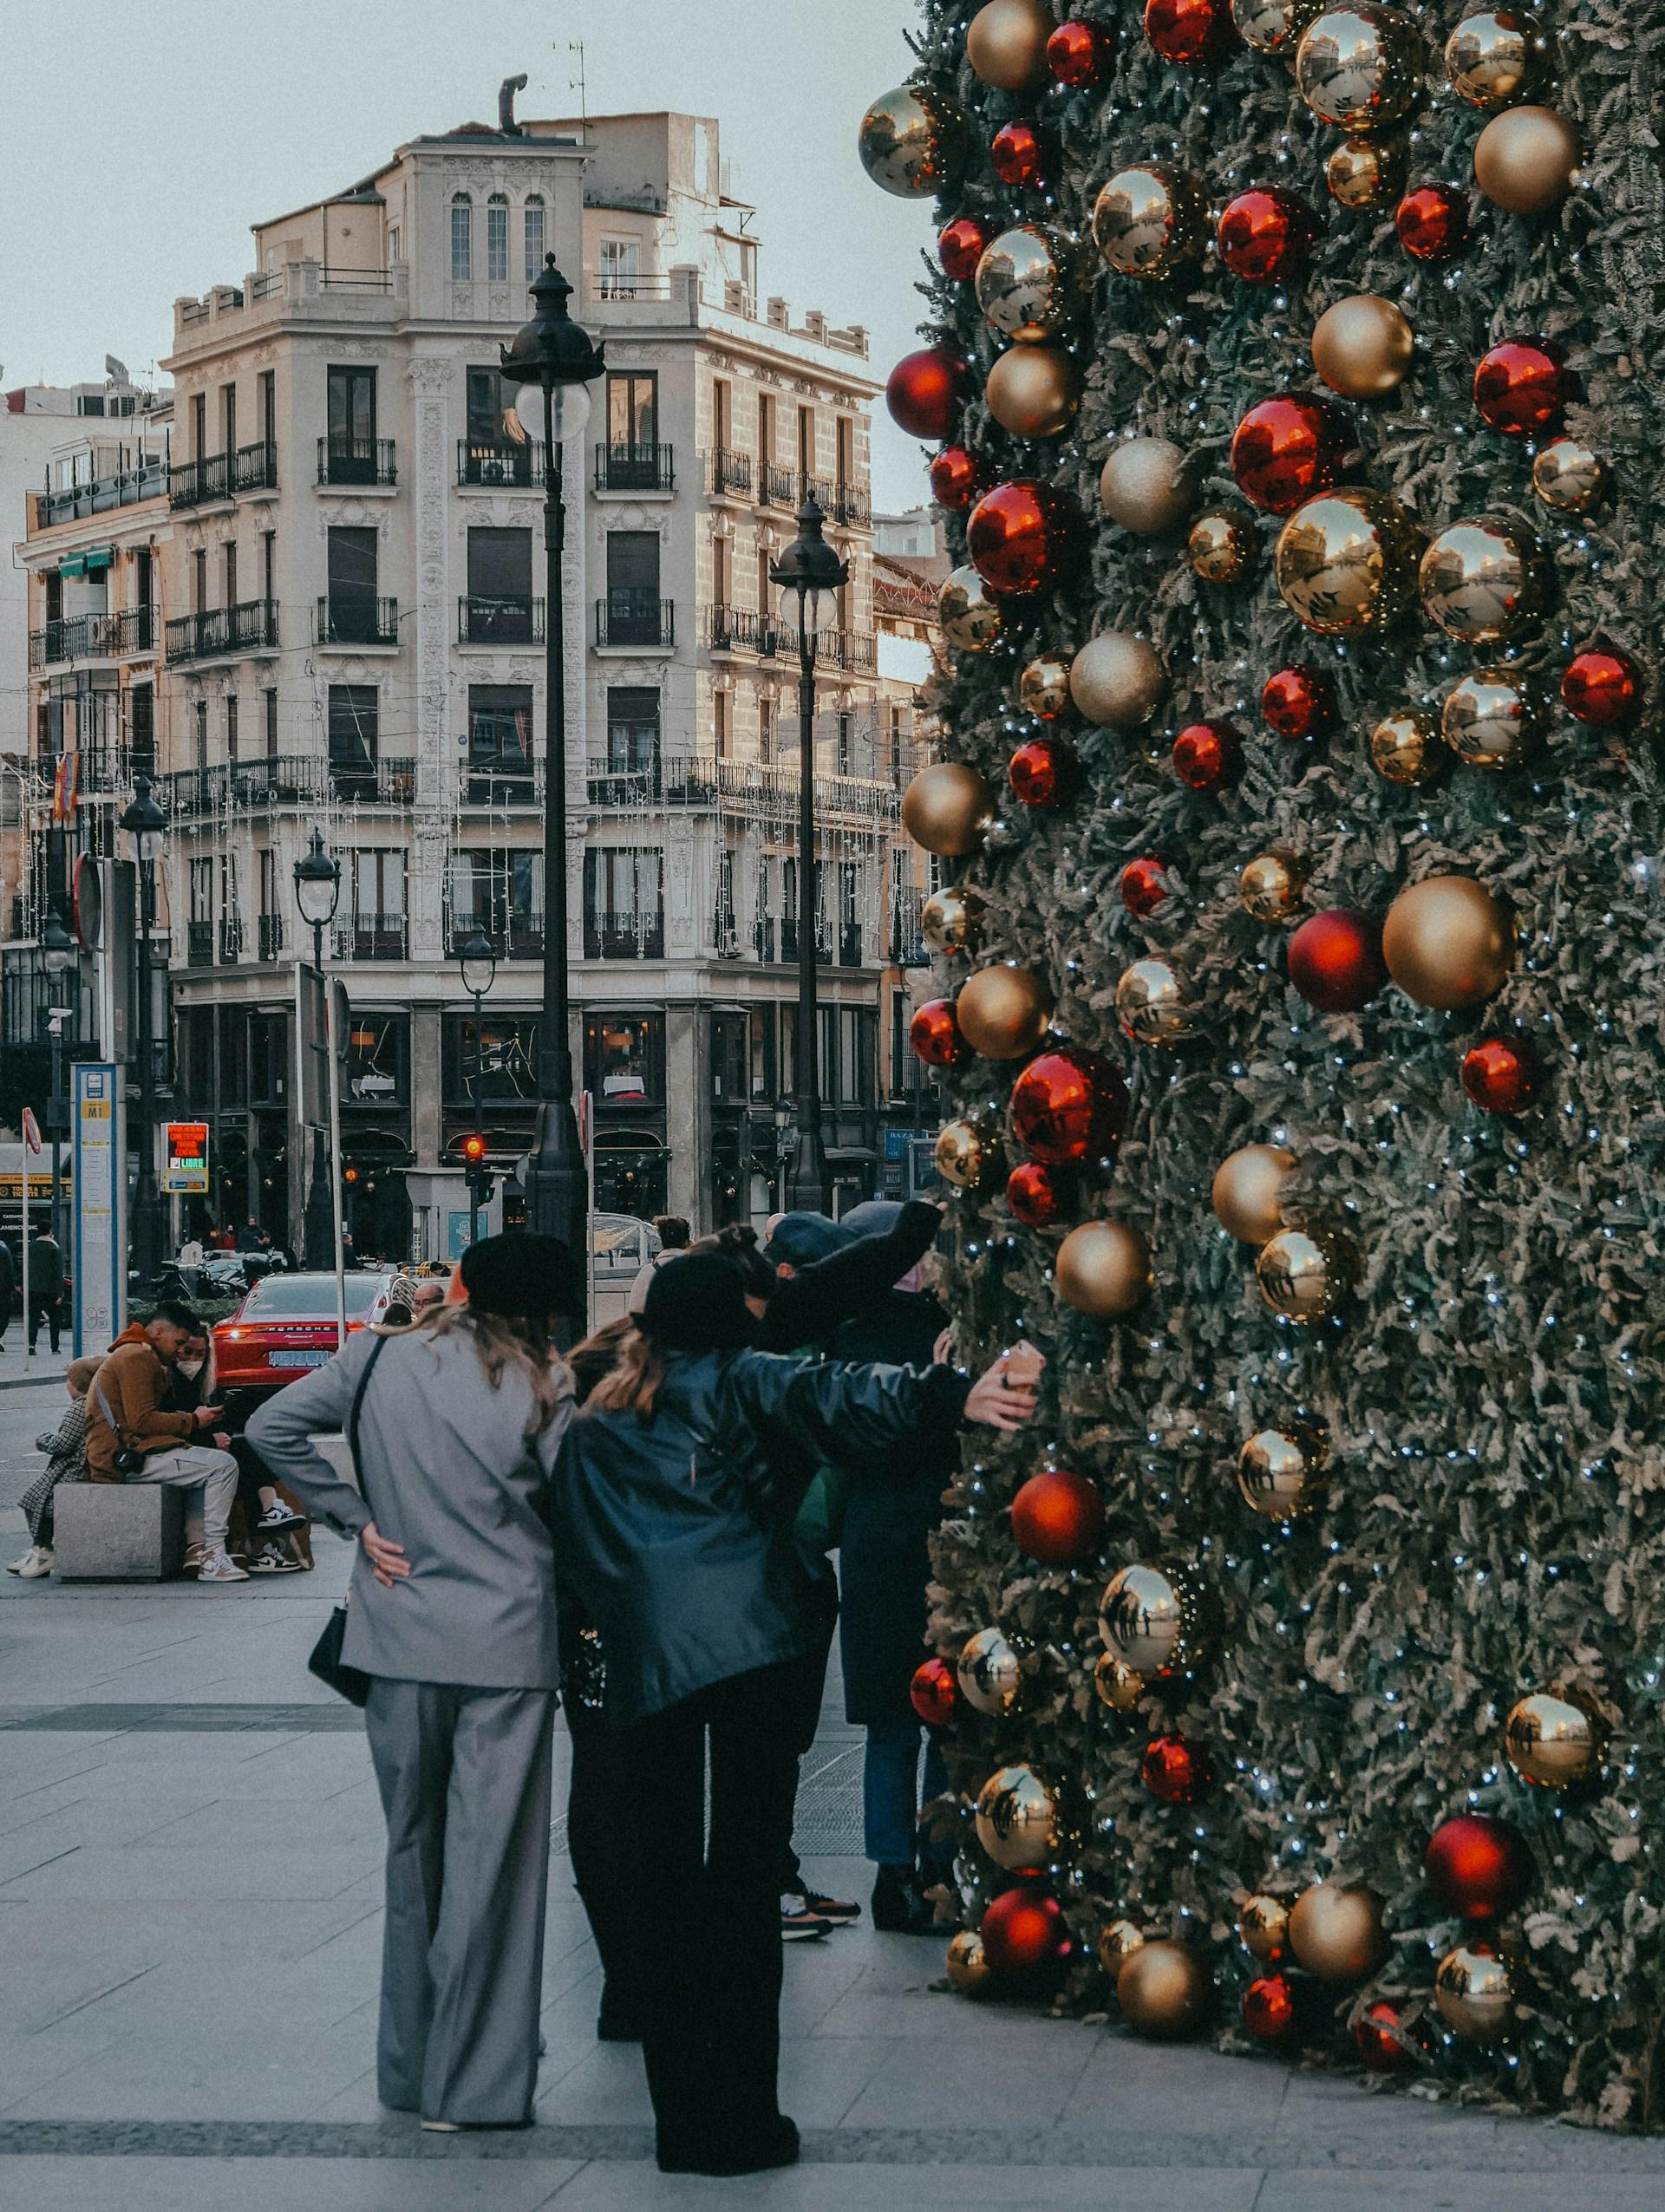 Some of the Best Spanish Cities to Visit in Winter